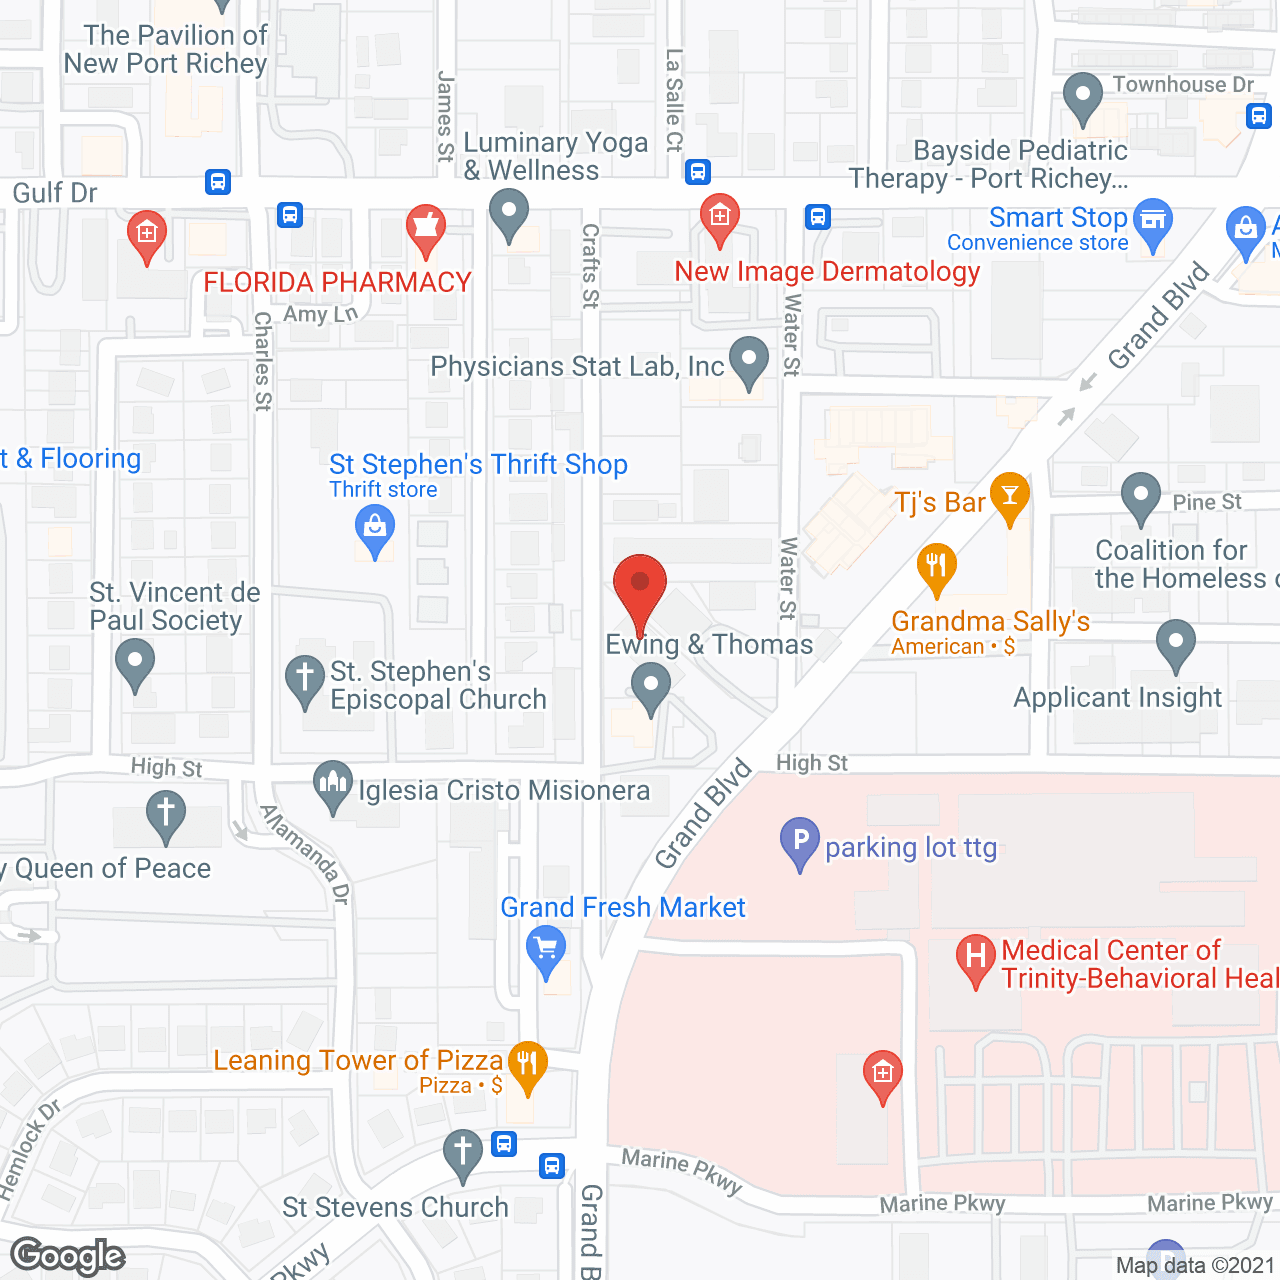 Universal Care Concepts Inc in google map